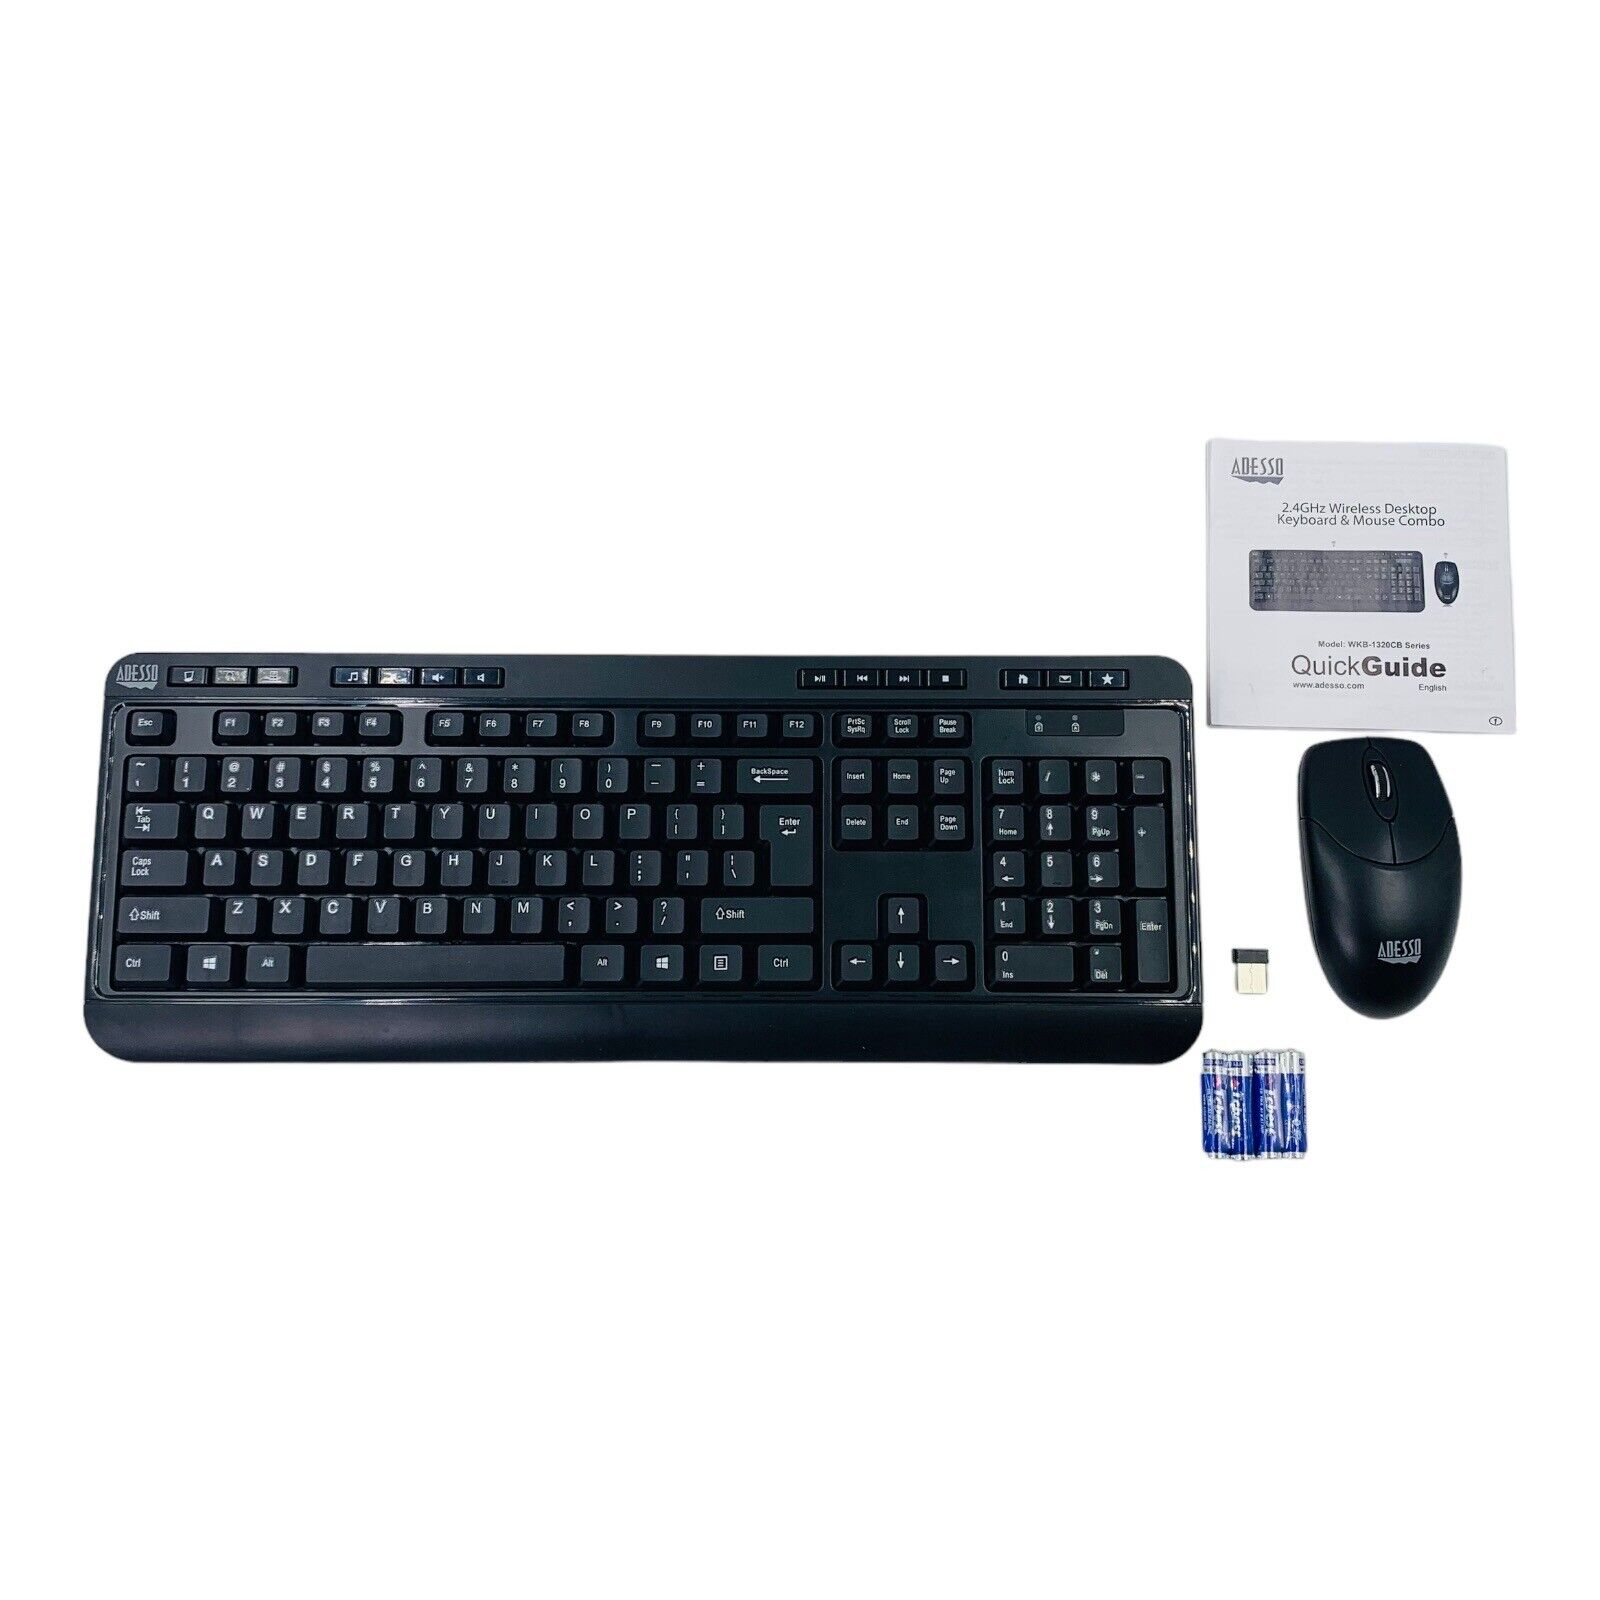 Adesso Antimicrobial Wireless Desktop Keyboard & Mouse, Black